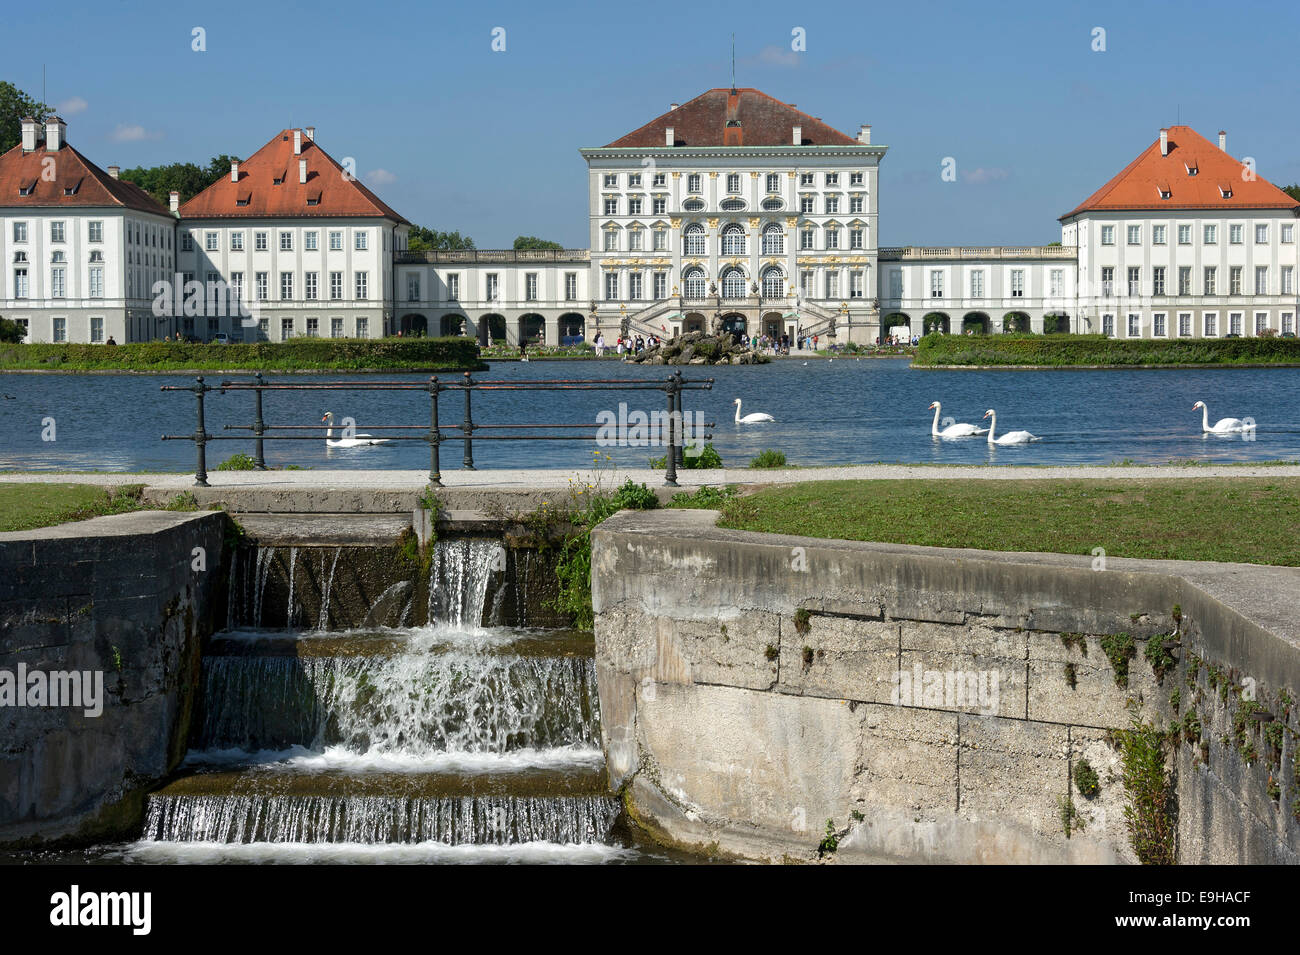 East side with canal, Nymphenburg Palace, Munich, Upper Bavaria, Bavaria, Germany Stock Photo